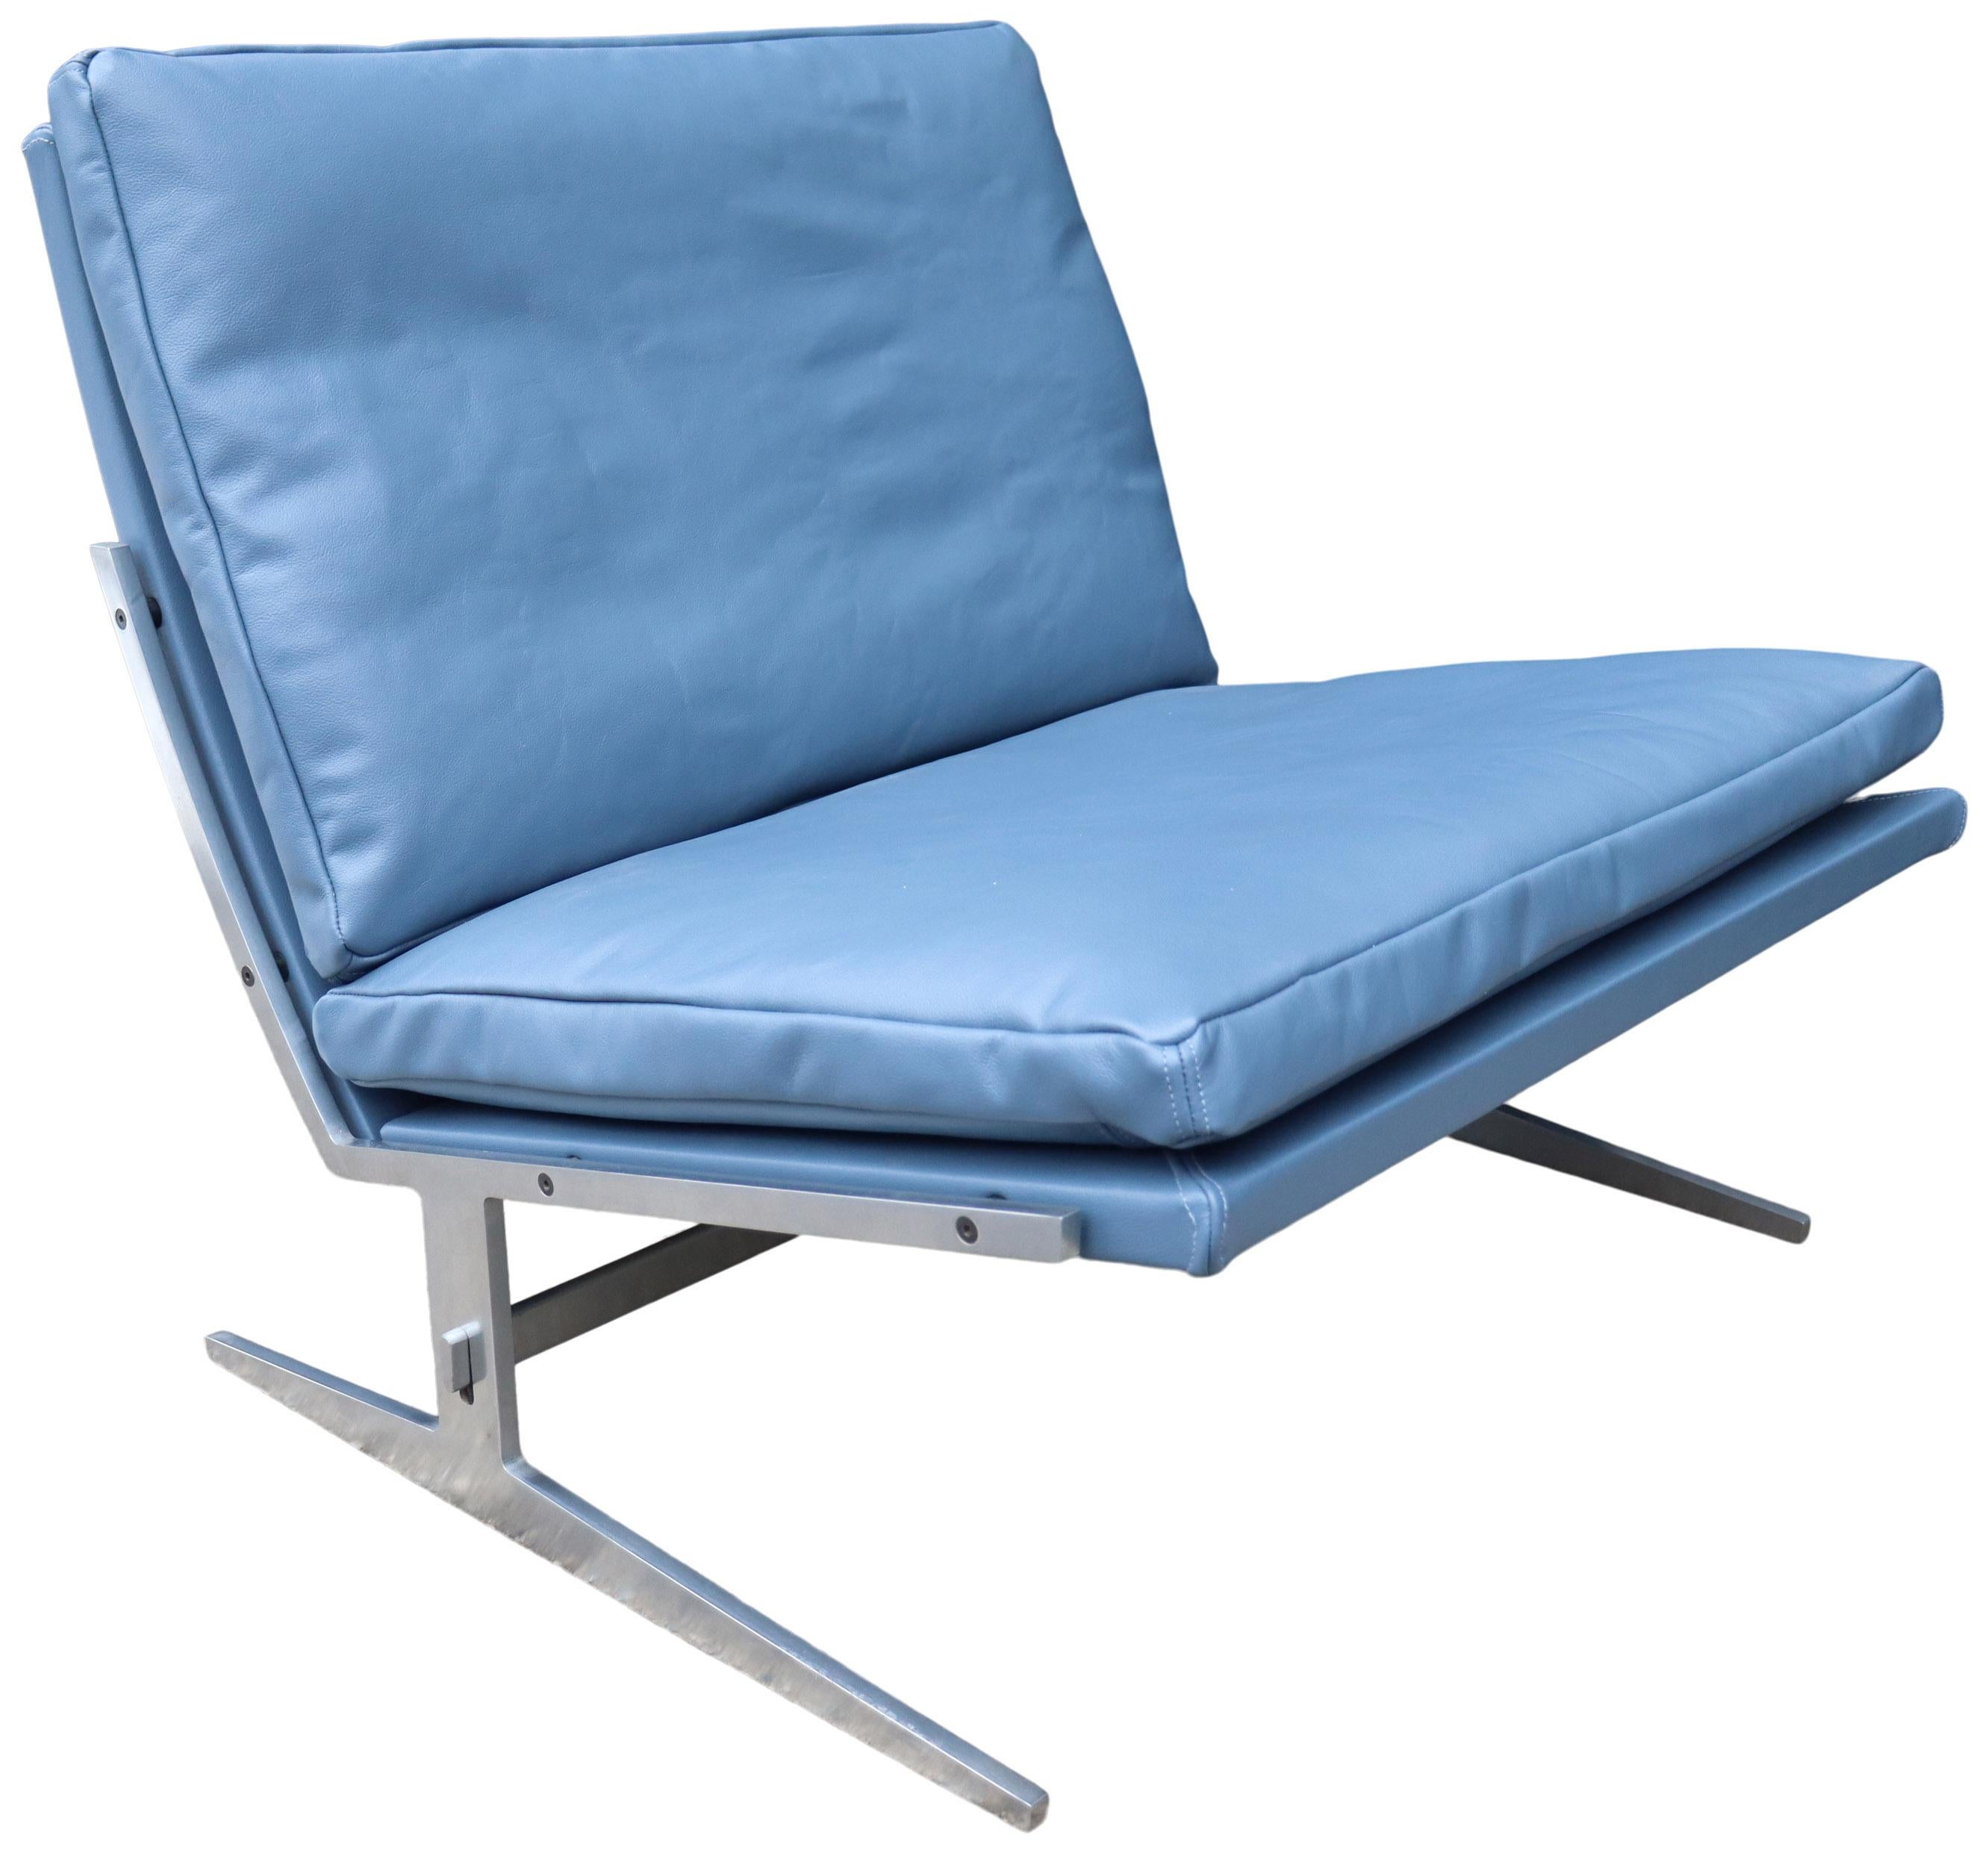 For your consideration is this amazing Jørgen Kastholm & Preben Fabricius lounge chair in new leather upholstery matching the original blue color. Featuring a leather wrapped frame with down filled cushions on a stainless steel frame. A departure